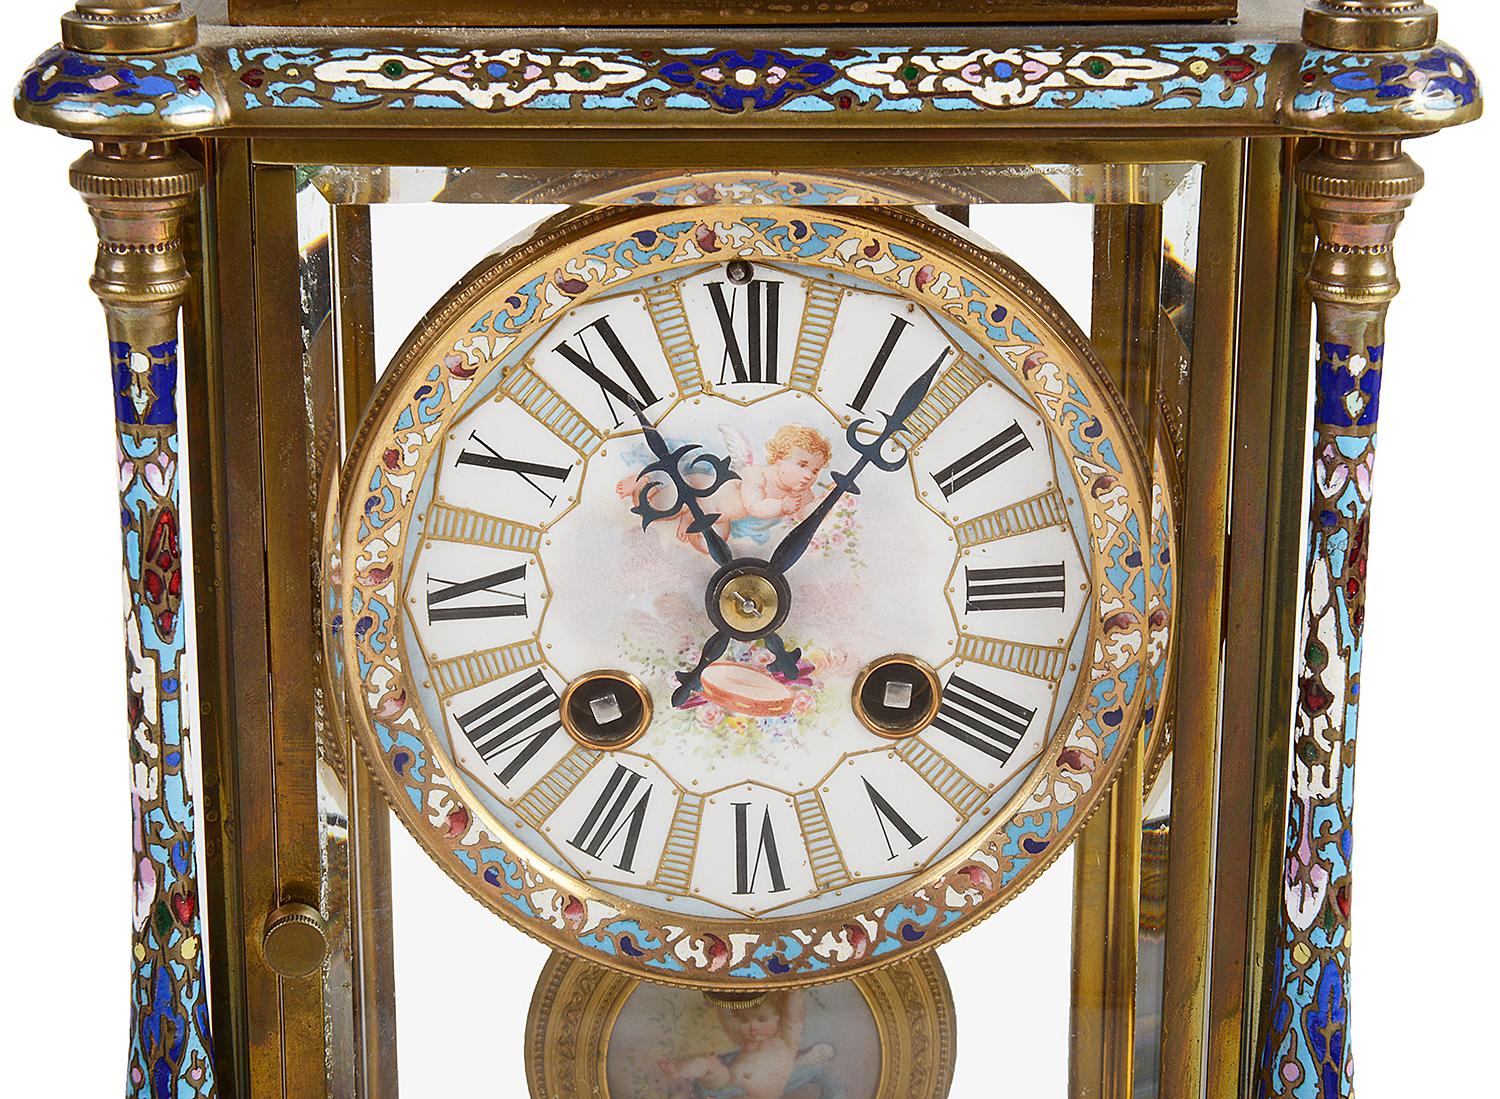 A very fine quality 19th century Louis XVI style gilded ormolu and champlevé enamel clock garniture, the four sided clock having four enamel columns, a pair of Sèvres style porcelain plaques depicting a gentlemen and lady, the porcelain clock face